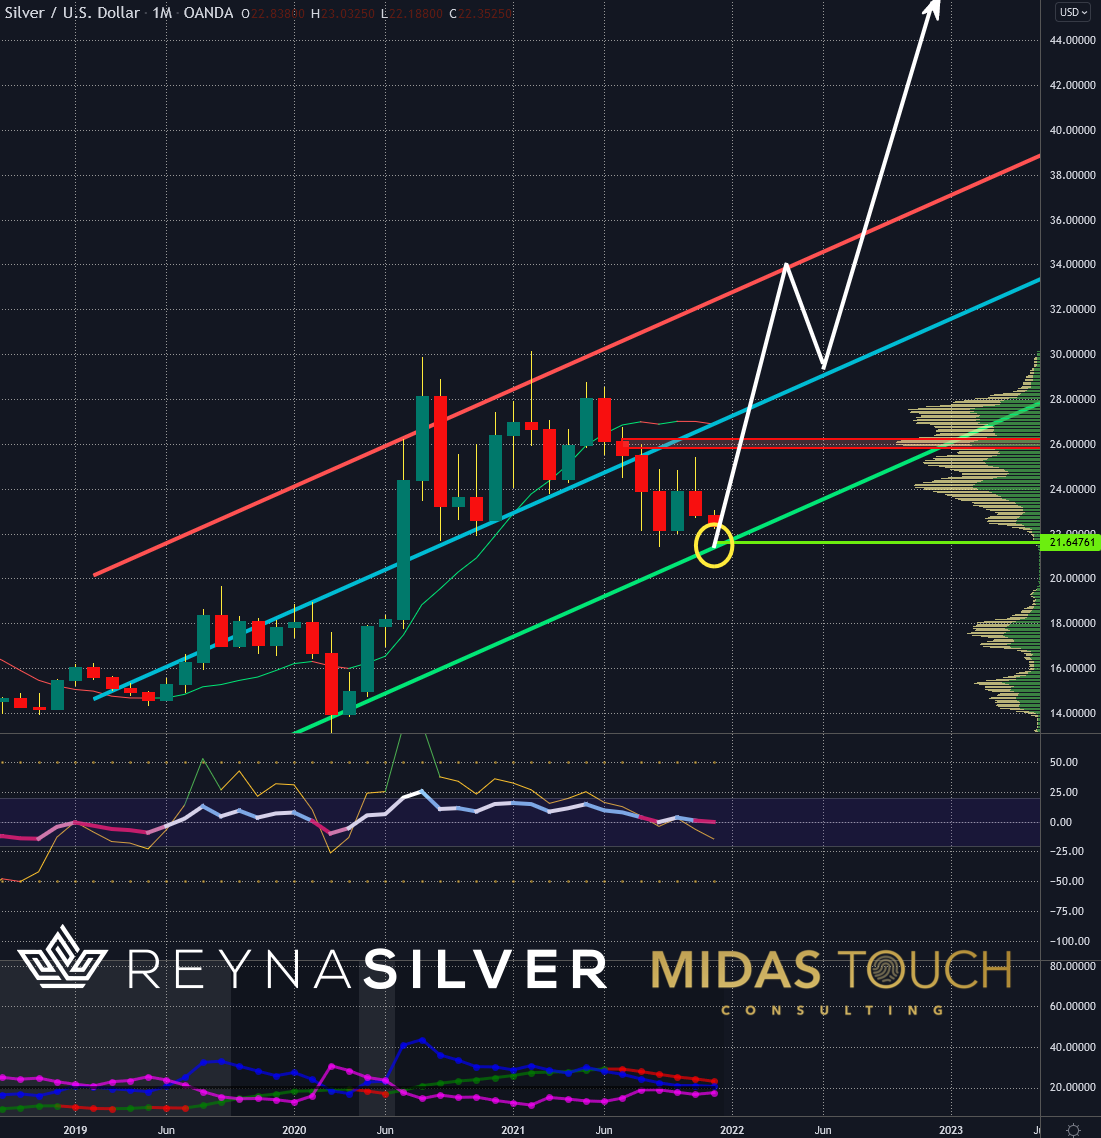 Silver in US-Dollar, monthly chart as of December 3rd, 2021. Ready, set, silver, go